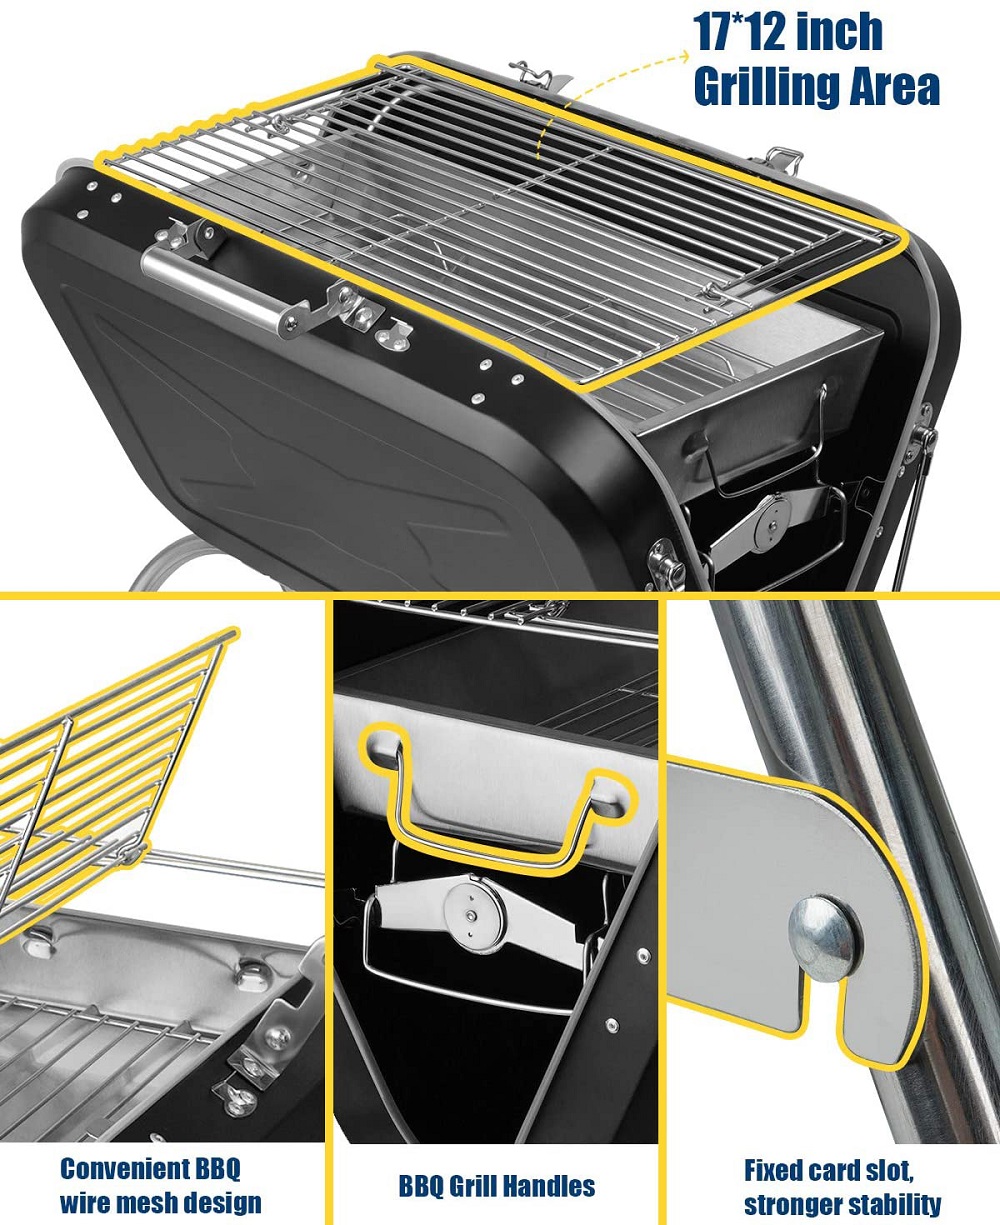 Charcoal BBQ Grill Outdoor Grill, SEGMART 24" Portable BBQ Charcoal Grill Lightweight BBQ Grill, Small Portable Charcoal Grill w/ Handle & Adjustable Grate, Stainless Steel, Easy to Clean, Black, H384 - image 5 of 10